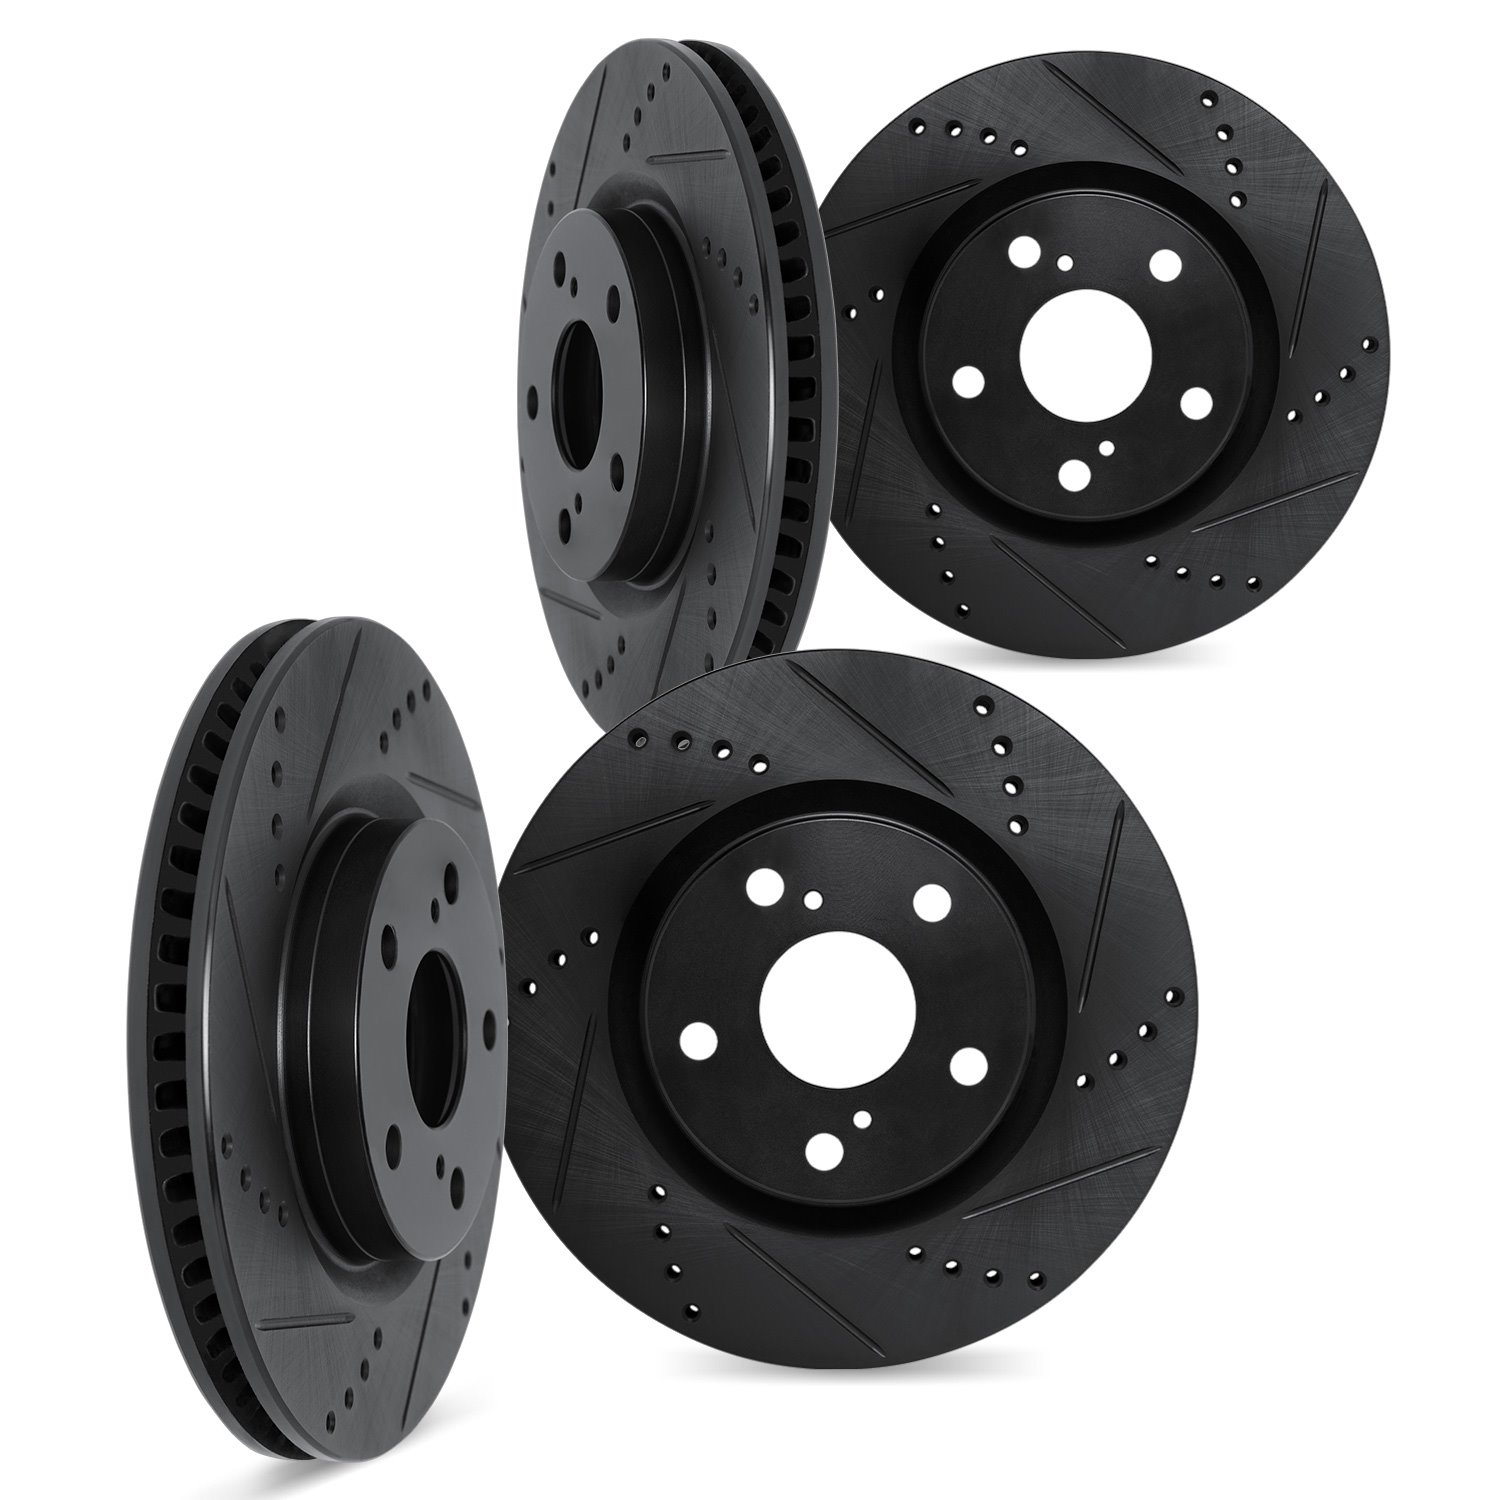 8004-75022 Drilled/Slotted Brake Rotors [Black], 2001-2006 Lexus/Toyota/Scion, Position: Front and Rear